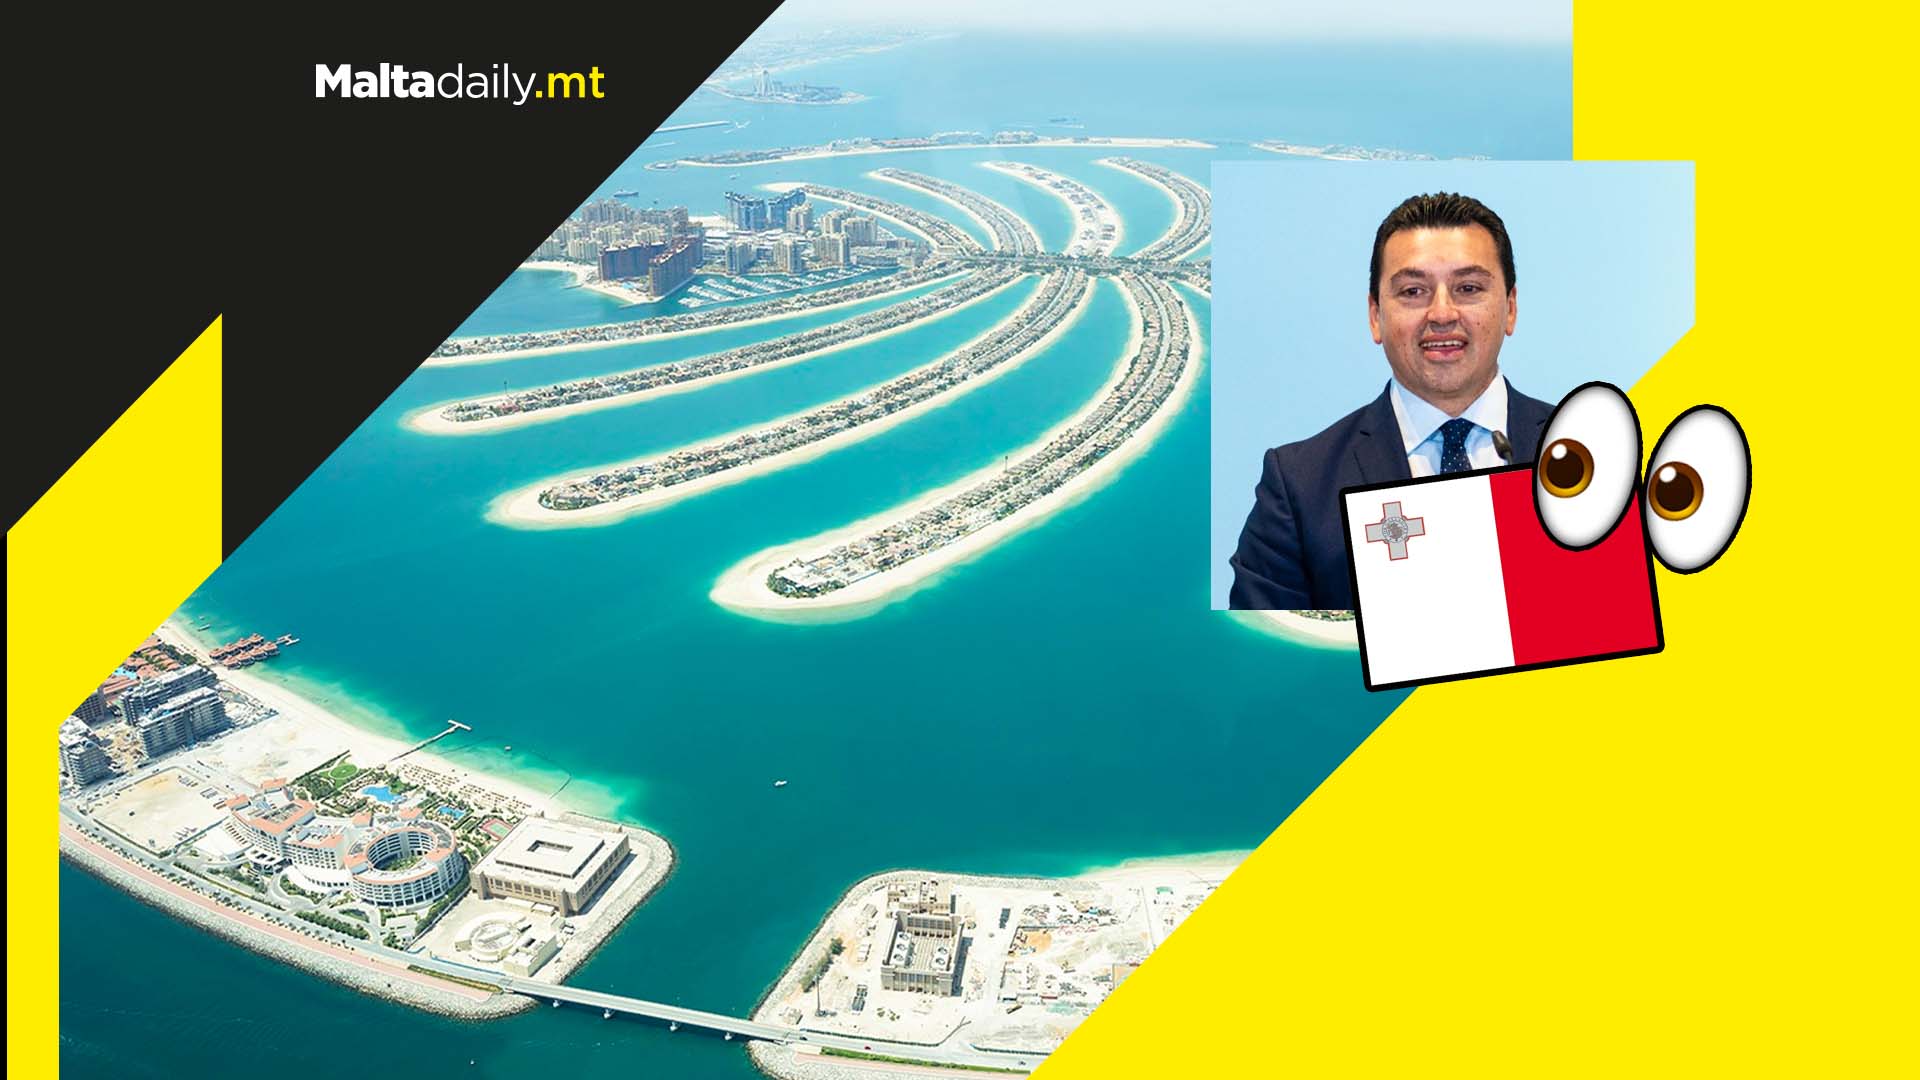 Could Malta become the next Dubai? Land reclamation discussion ongoing